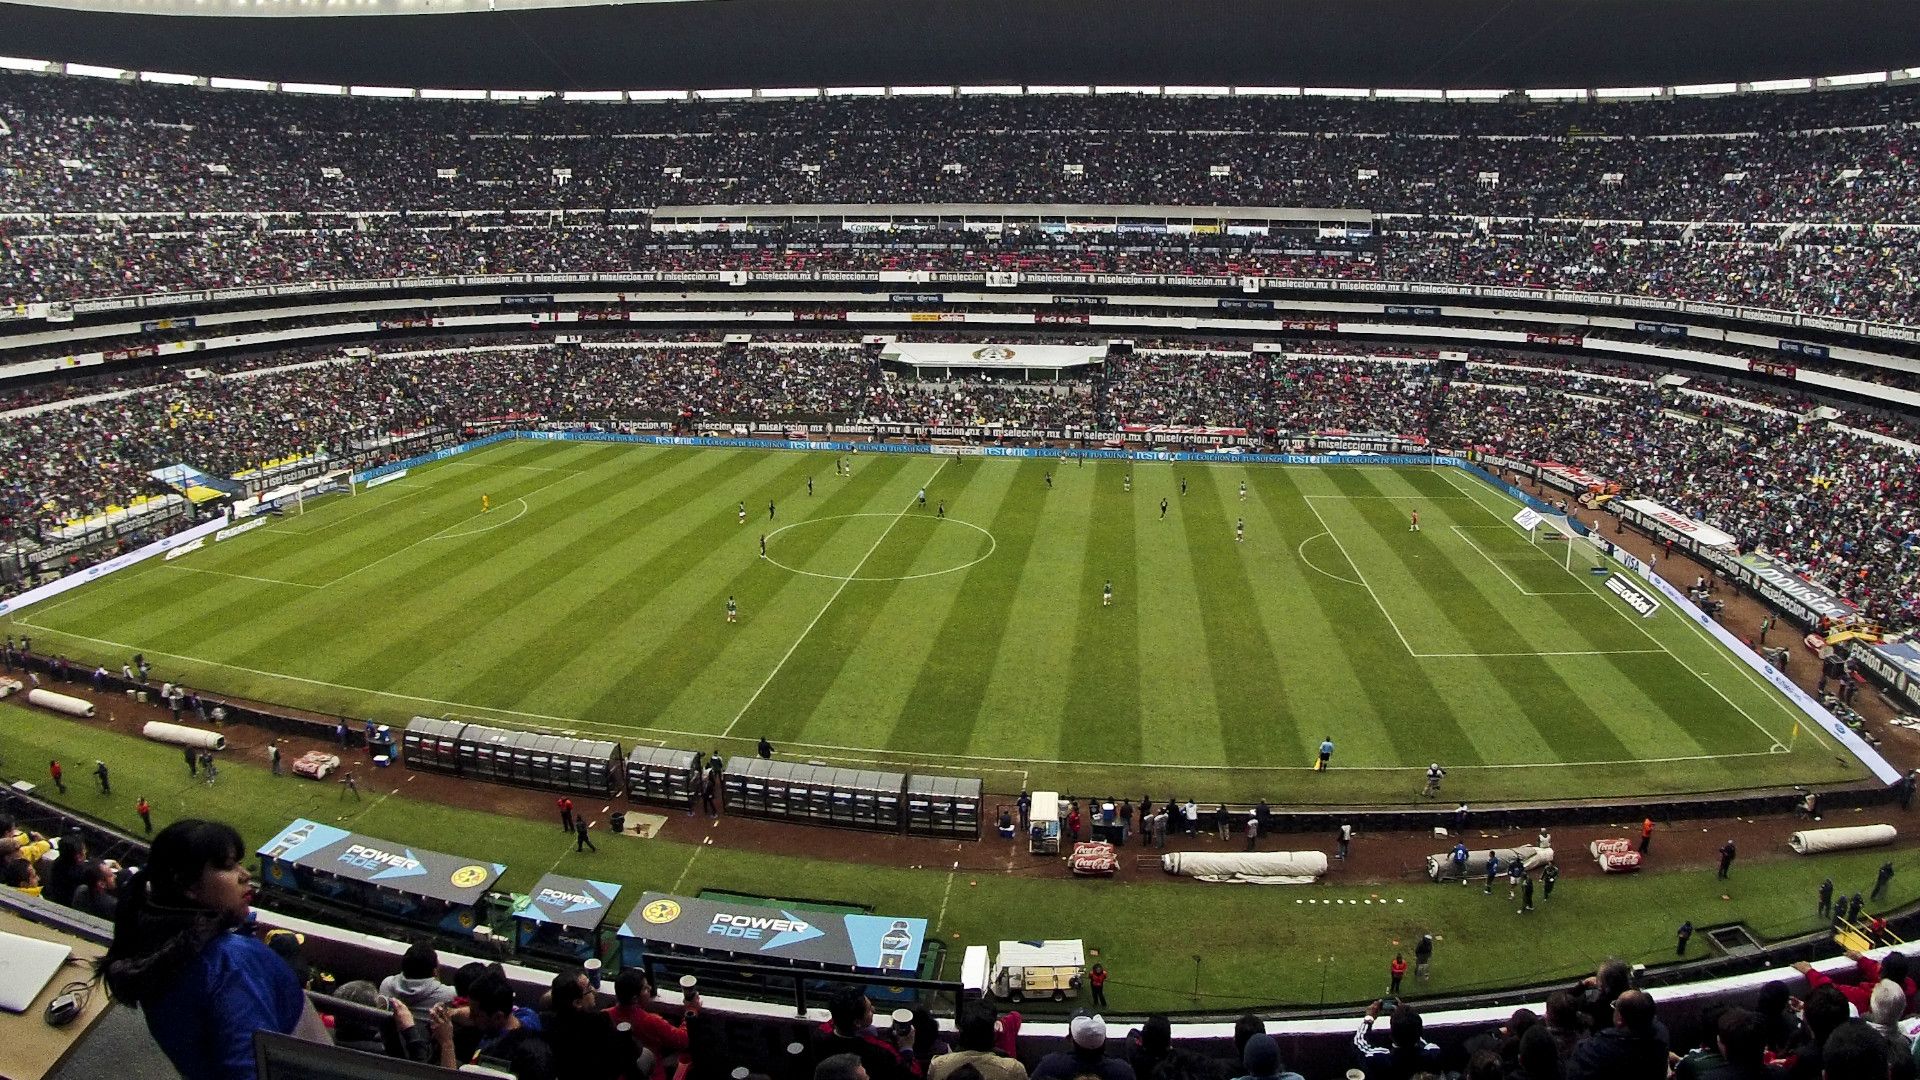 Estadio Azteca doesn't have the same weight it once did